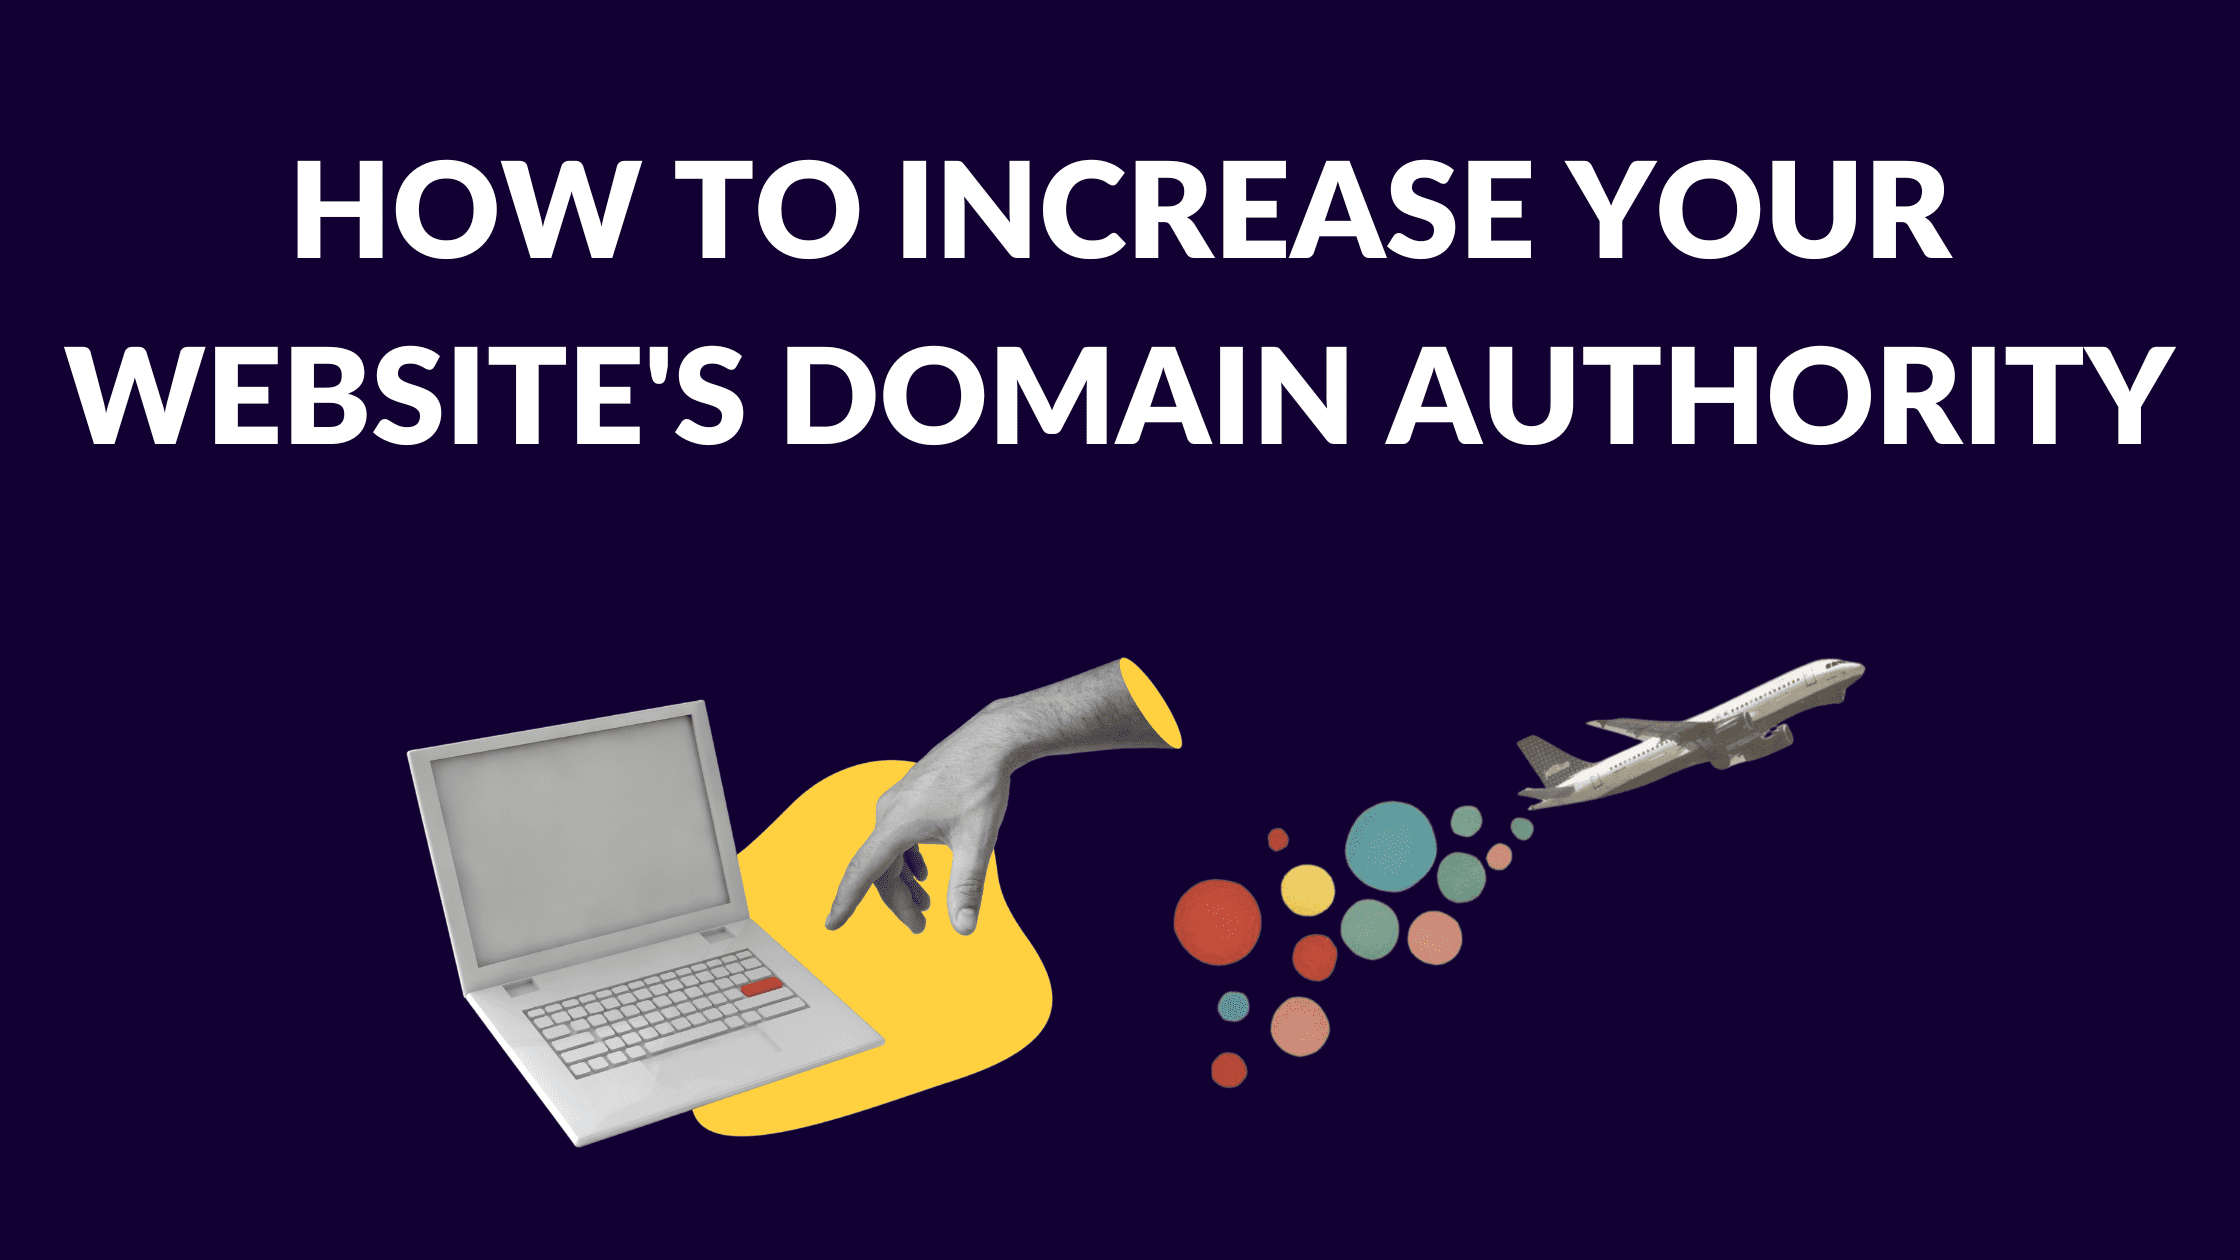 Ways to increase your website authority